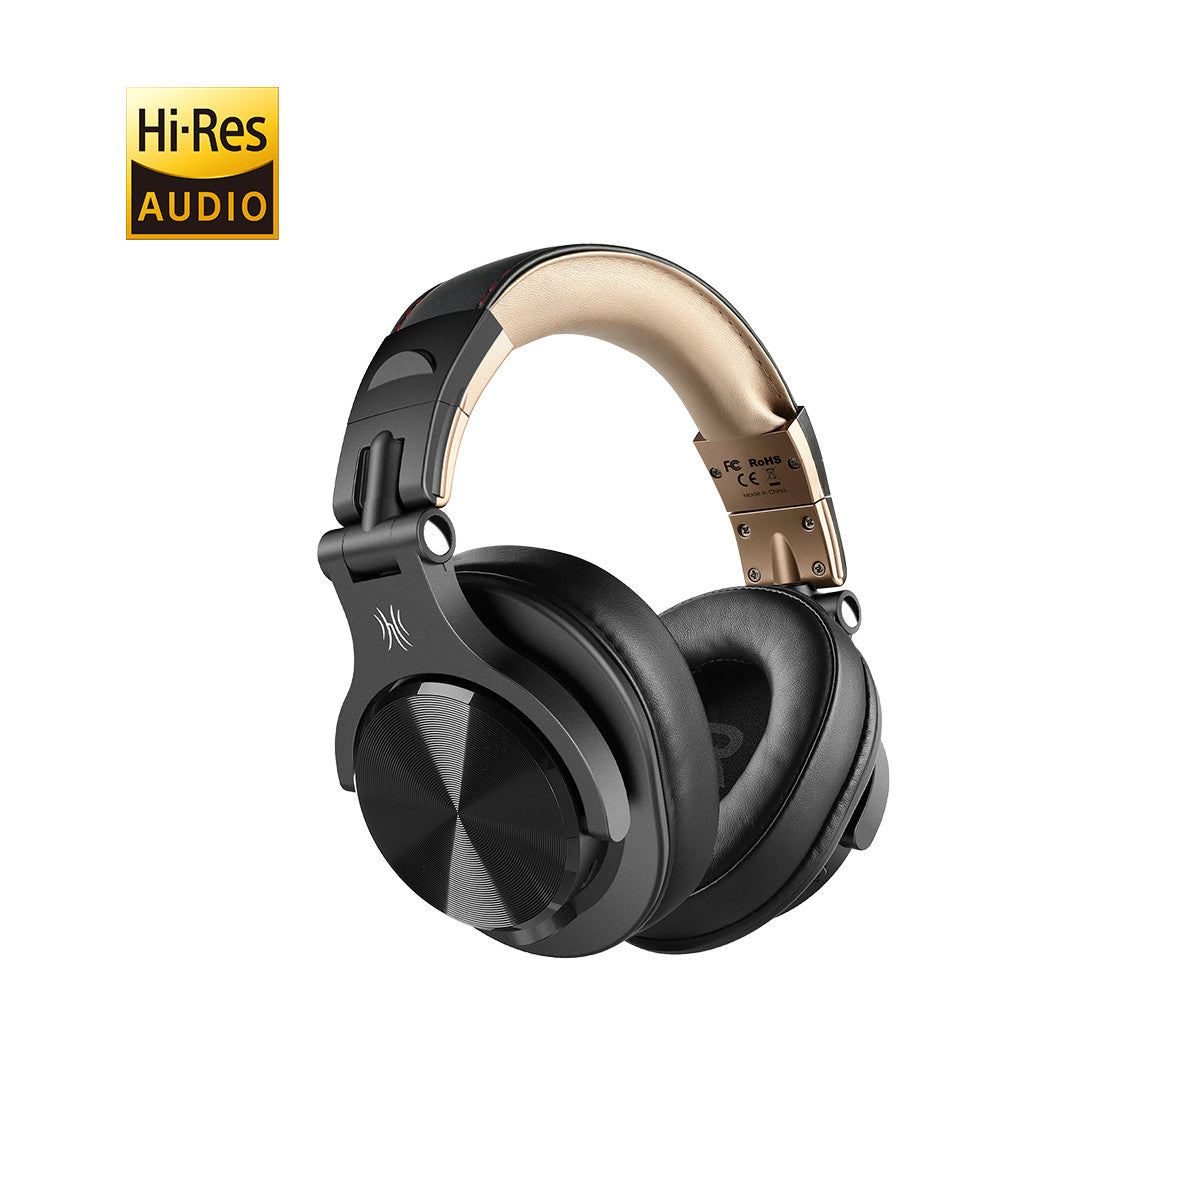 OneOdio A70 Bluetooth & Wired Headphones, Critically Acclaimed